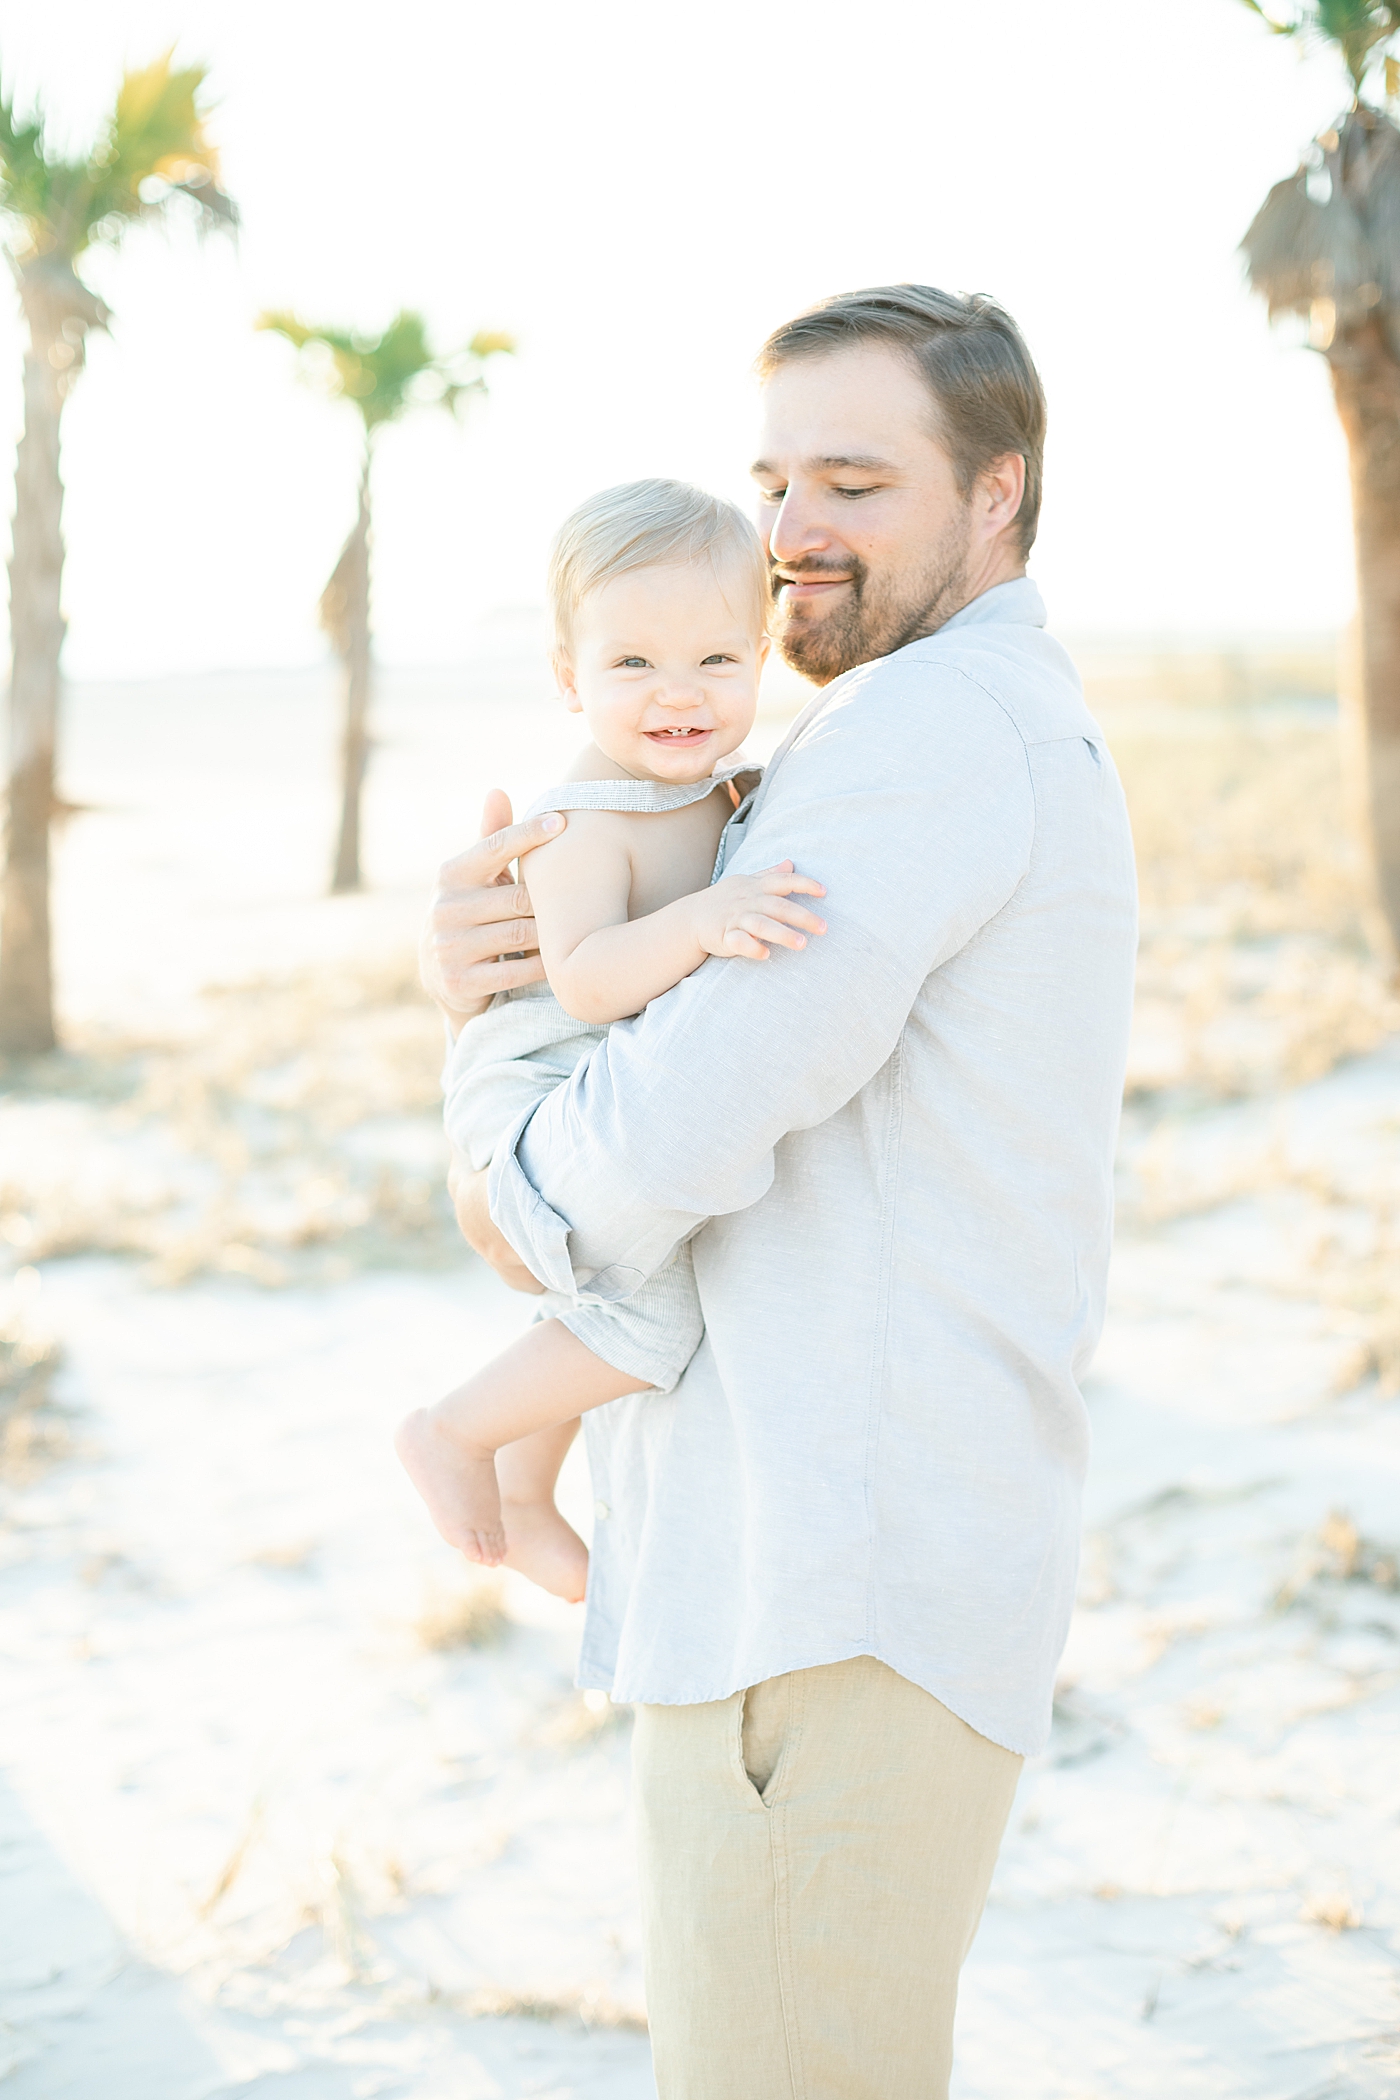 Father-son photo on the beach Photo by Little Sunshine Photography.